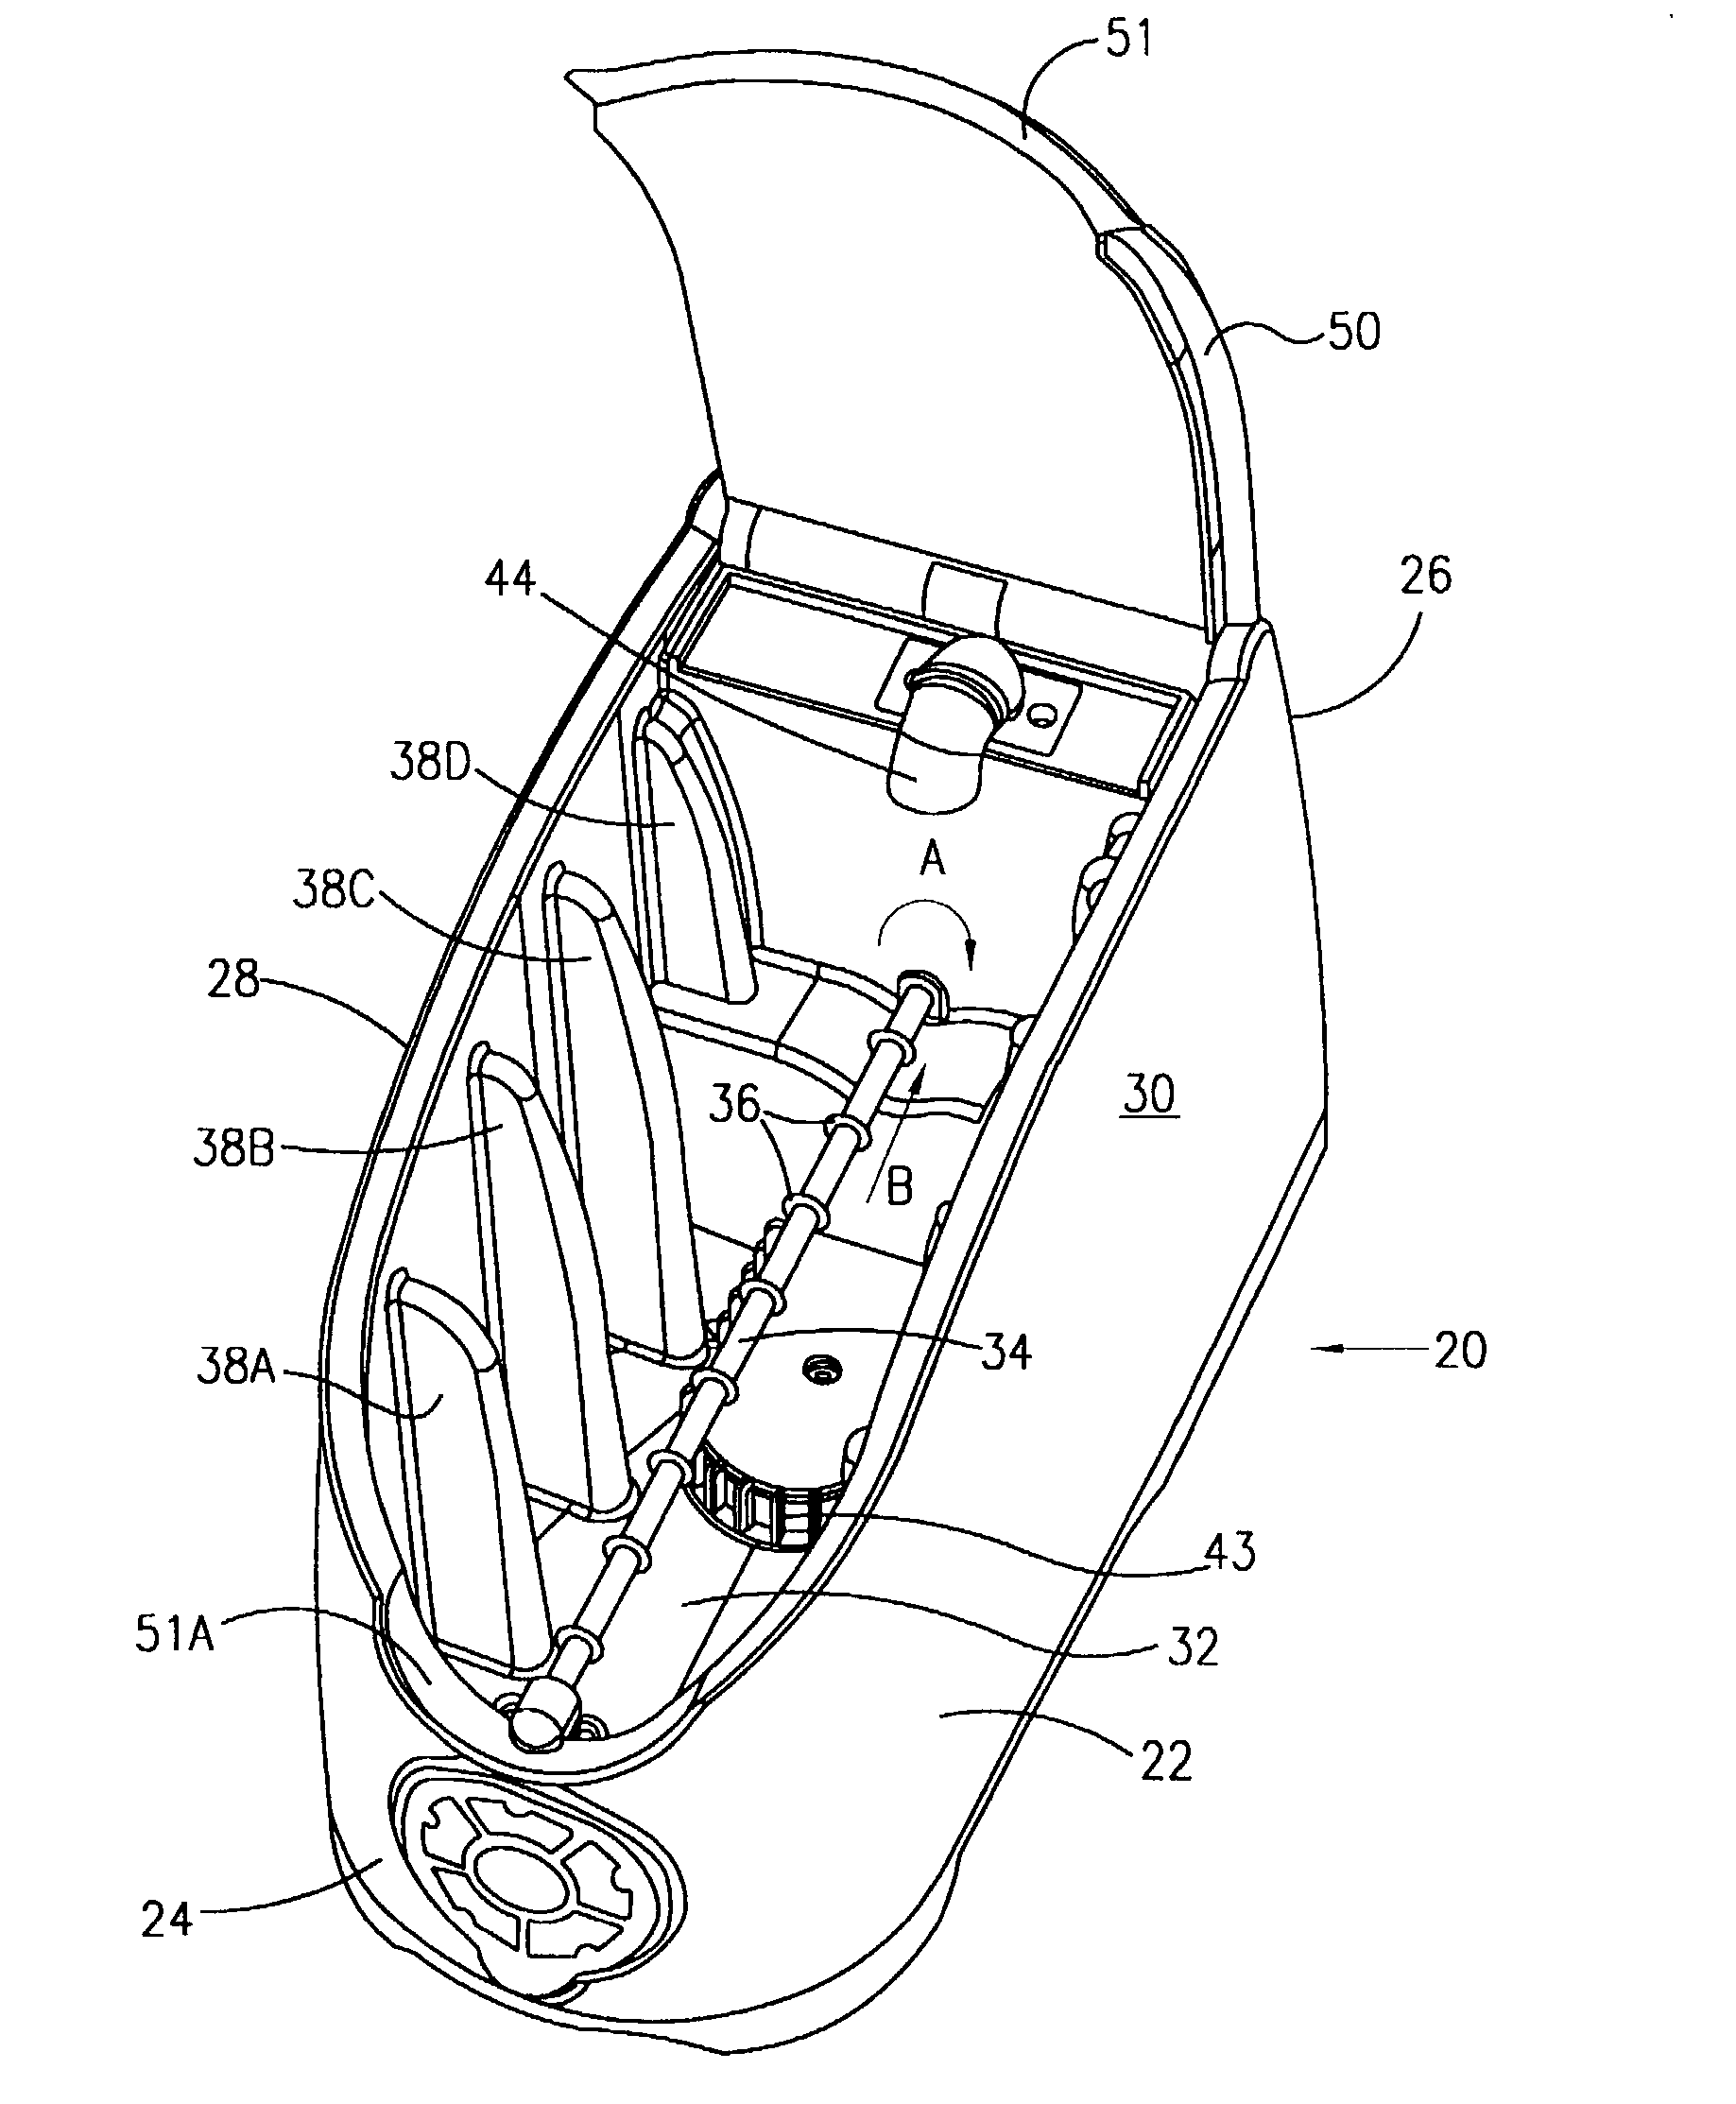 Rapid fluid cooling and heating device and method